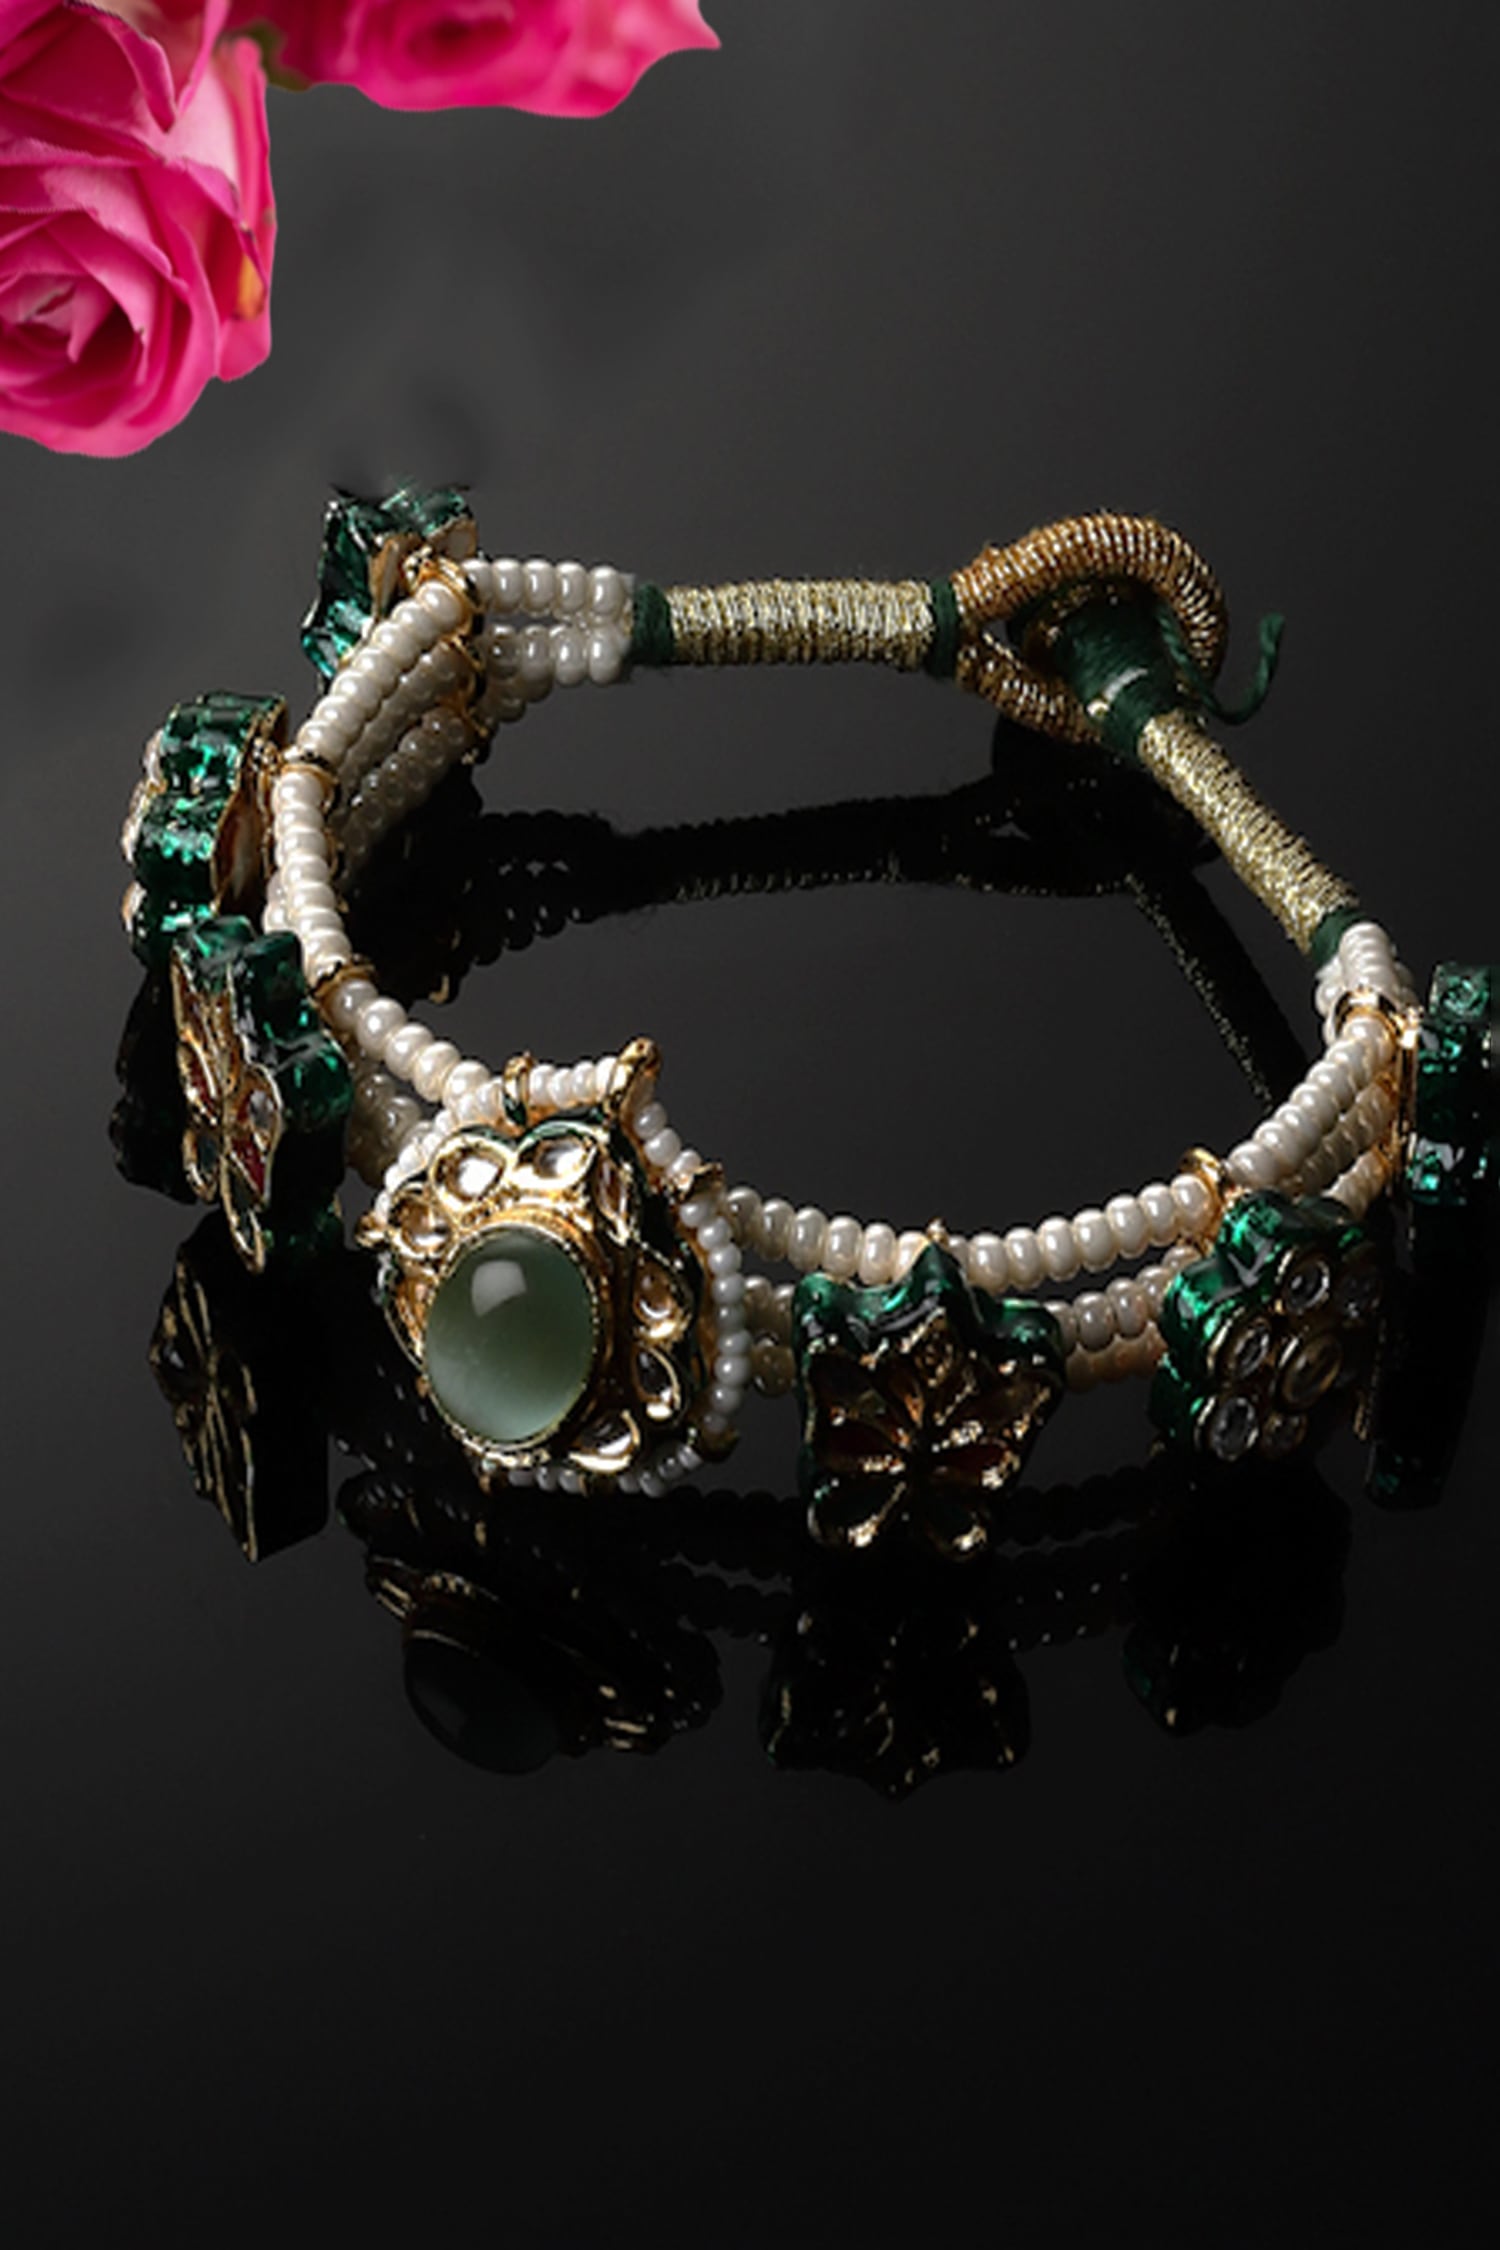 Saraf RS Jewellery Rose Gold Plated Green Emerald Studded Statement Bracelet  Buy Saraf RS Jewellery Rose Gold Plated Green Emerald Studded Statement  Bracelet Online at Best Price in India  Nykaa